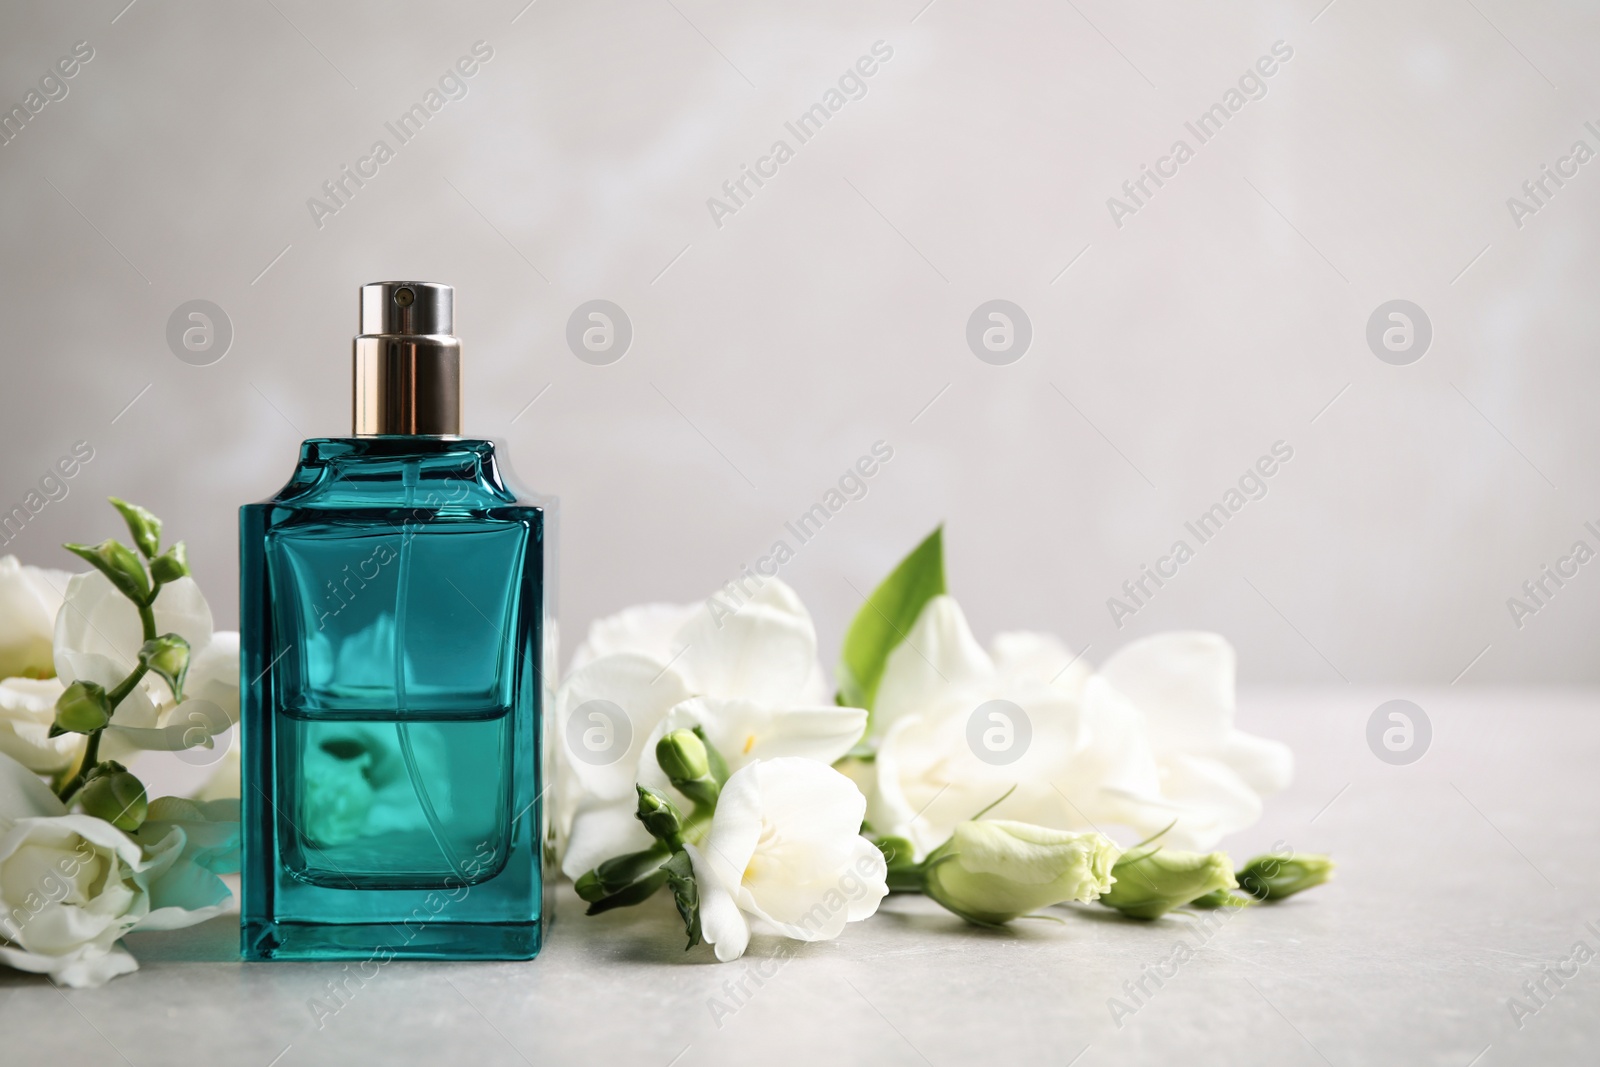 Photo of Bottle of perfume and beautiful flowers on light table. Space for text